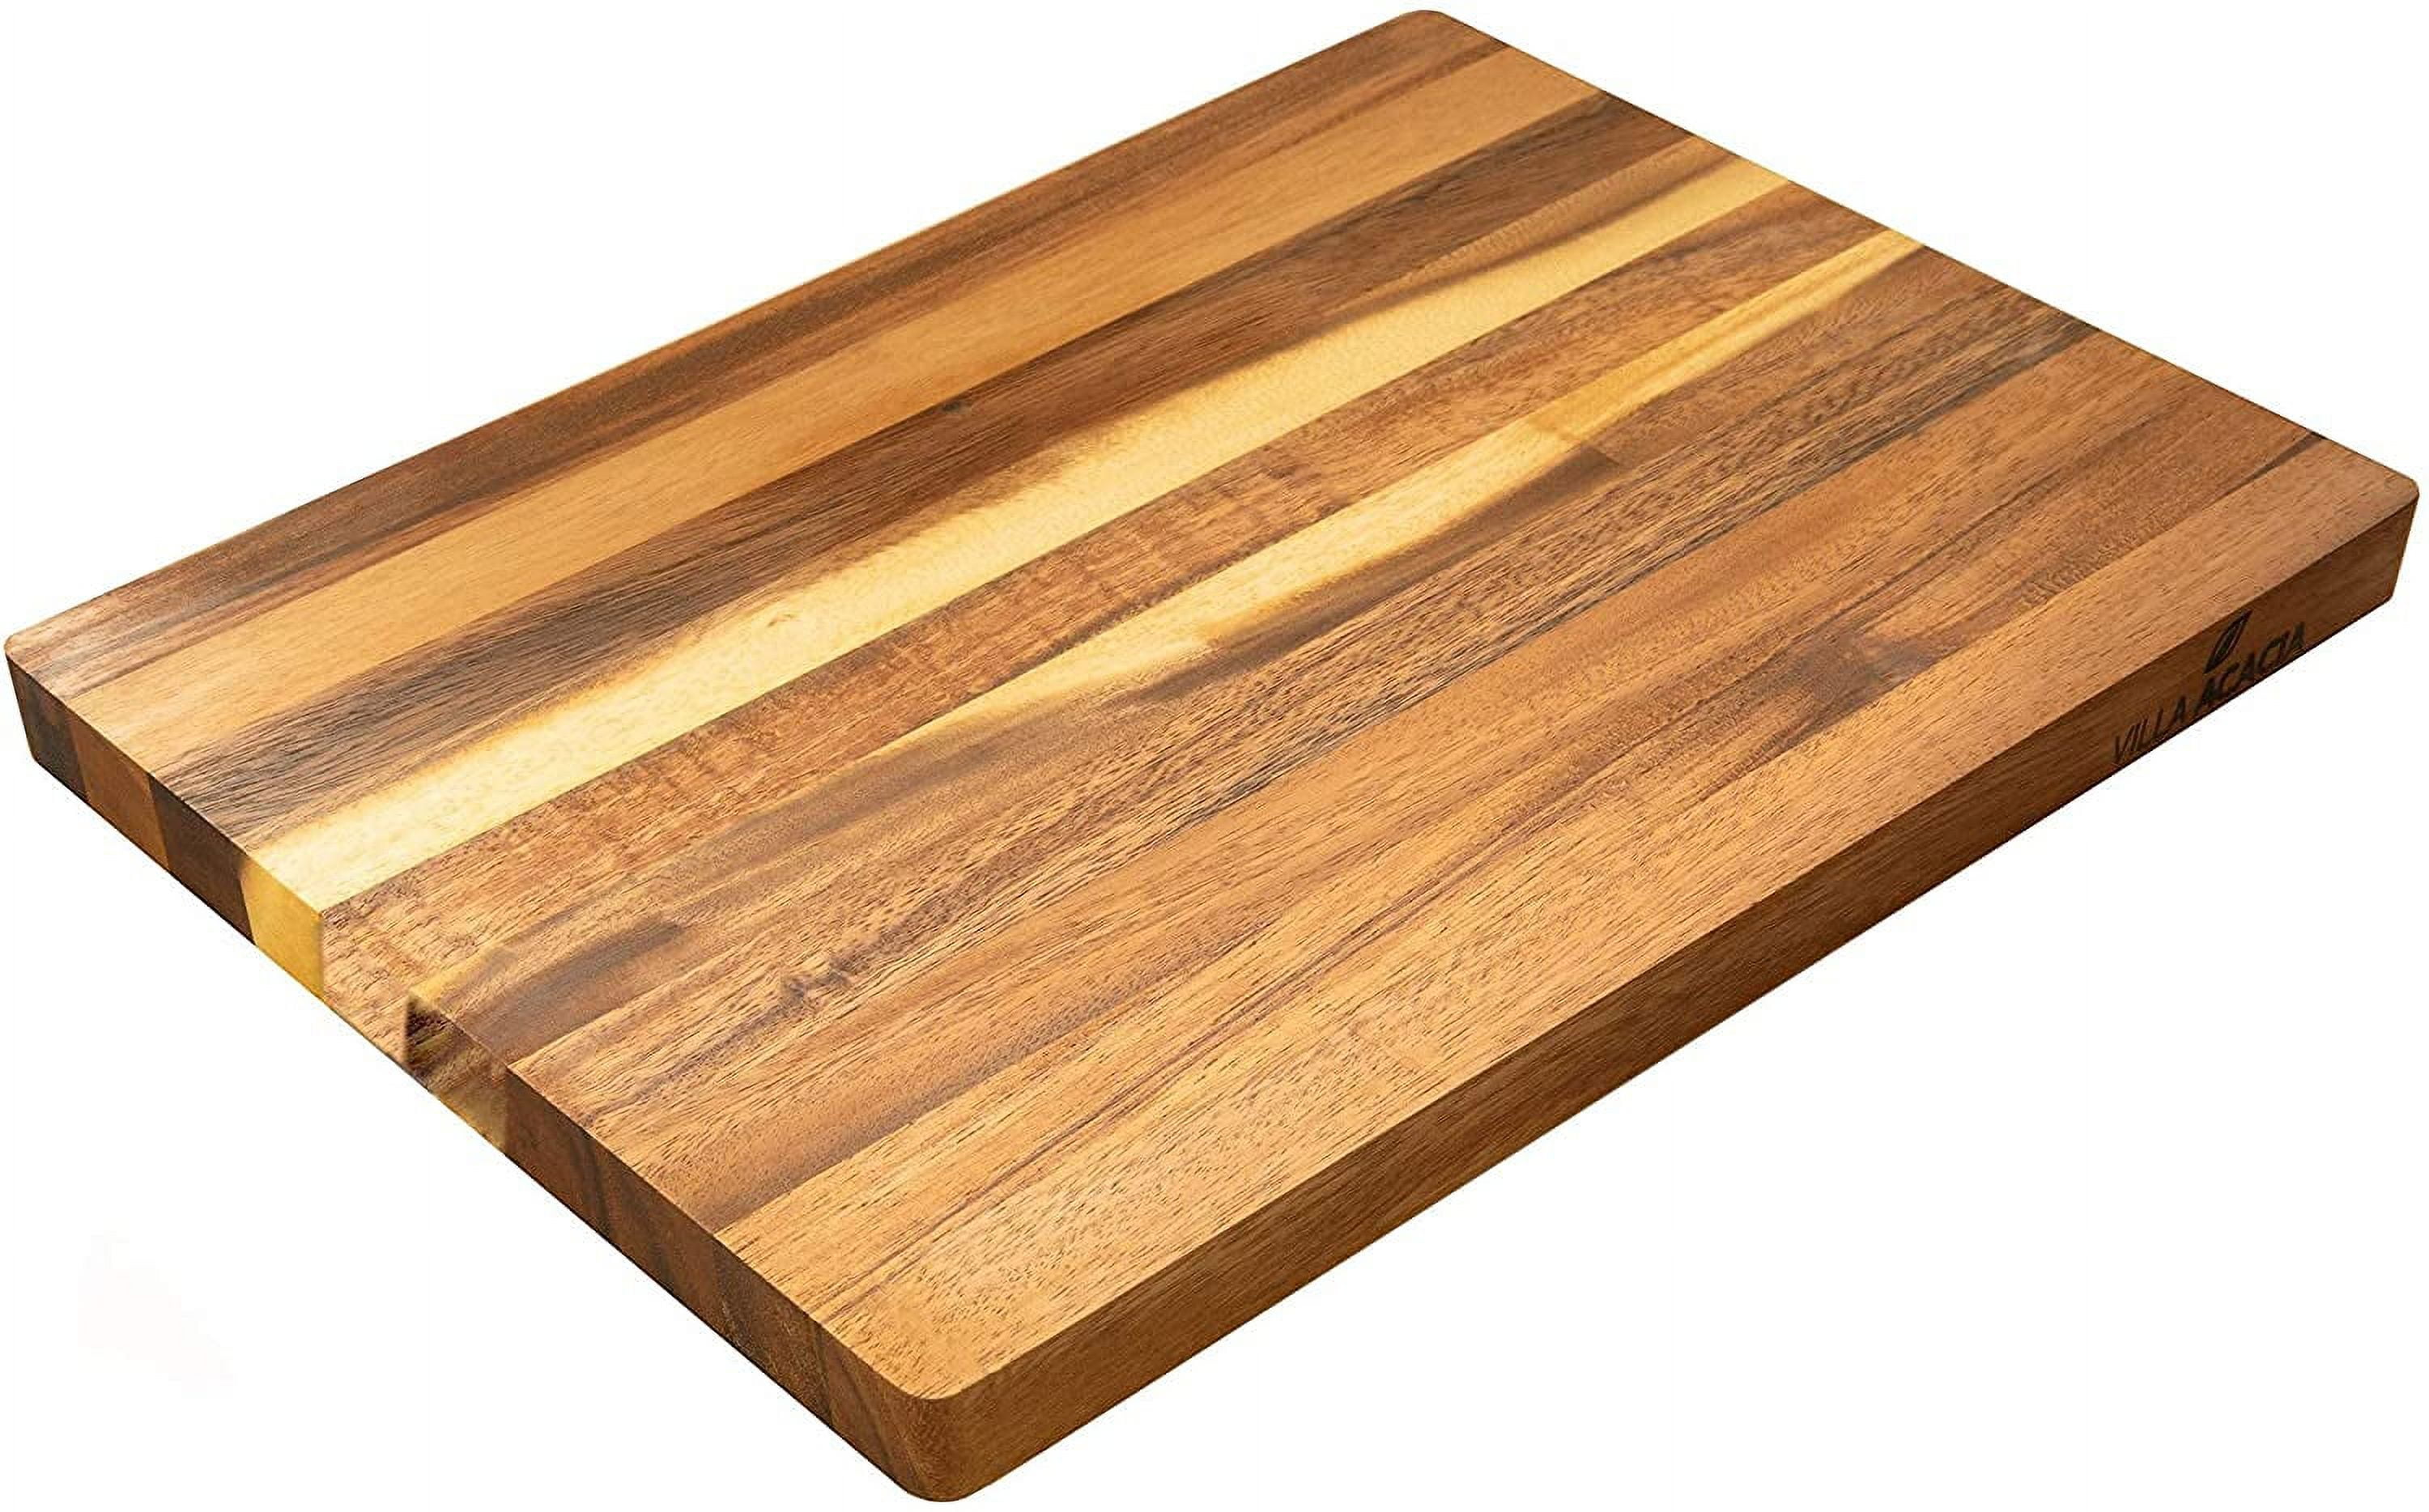 WhizMax Extra Large Bamboo Cutting Board for Kitchen, 30 x 20 Inch